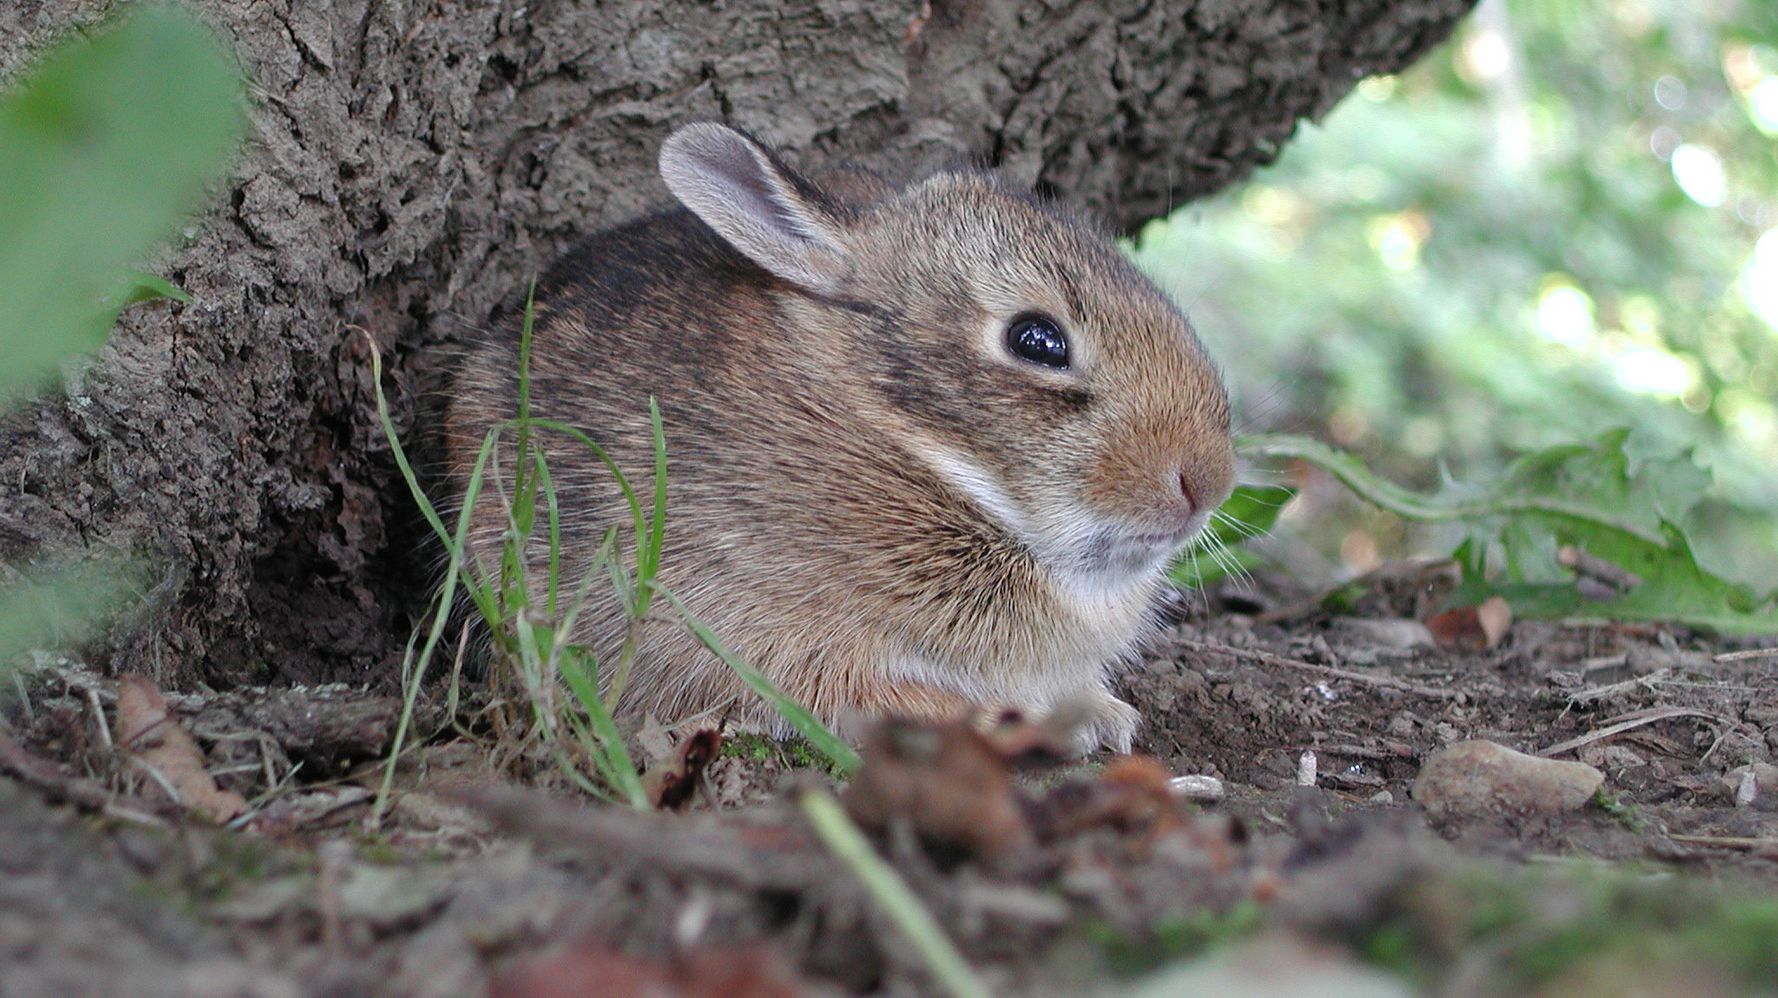 How Can You Tell If A Wild Baby Animal Needs Your Help?